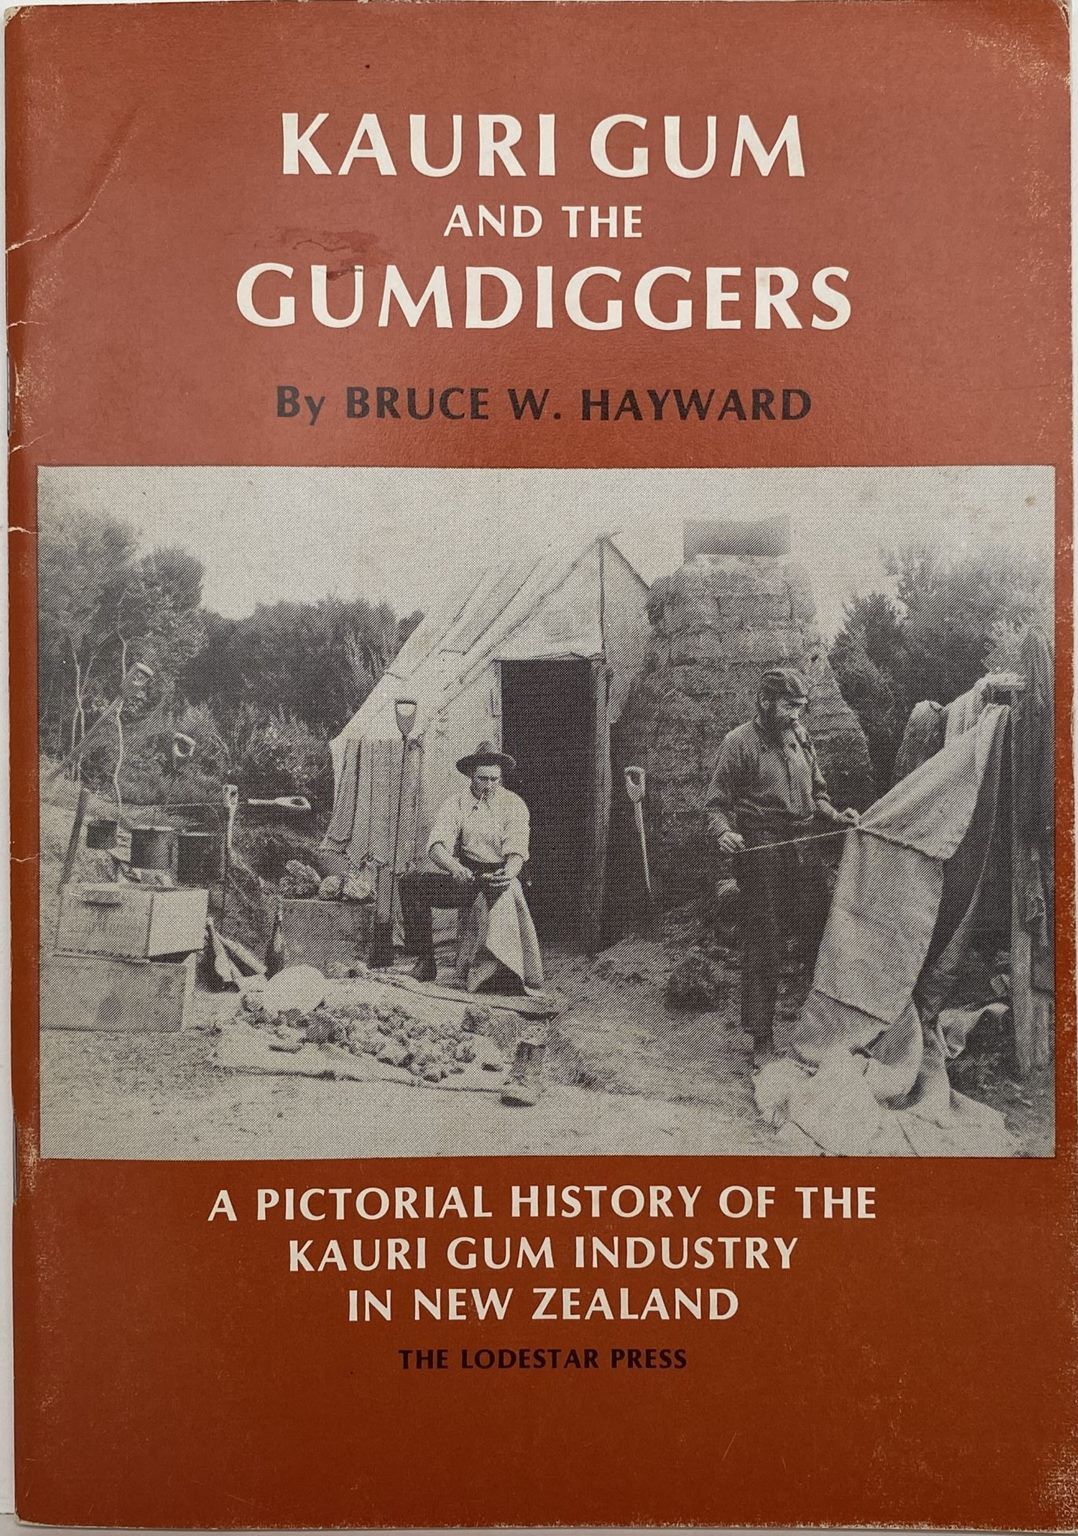 KAURI GUM and the GUMDIGGERS: A Pictorial History of the Kauri Gum Industry